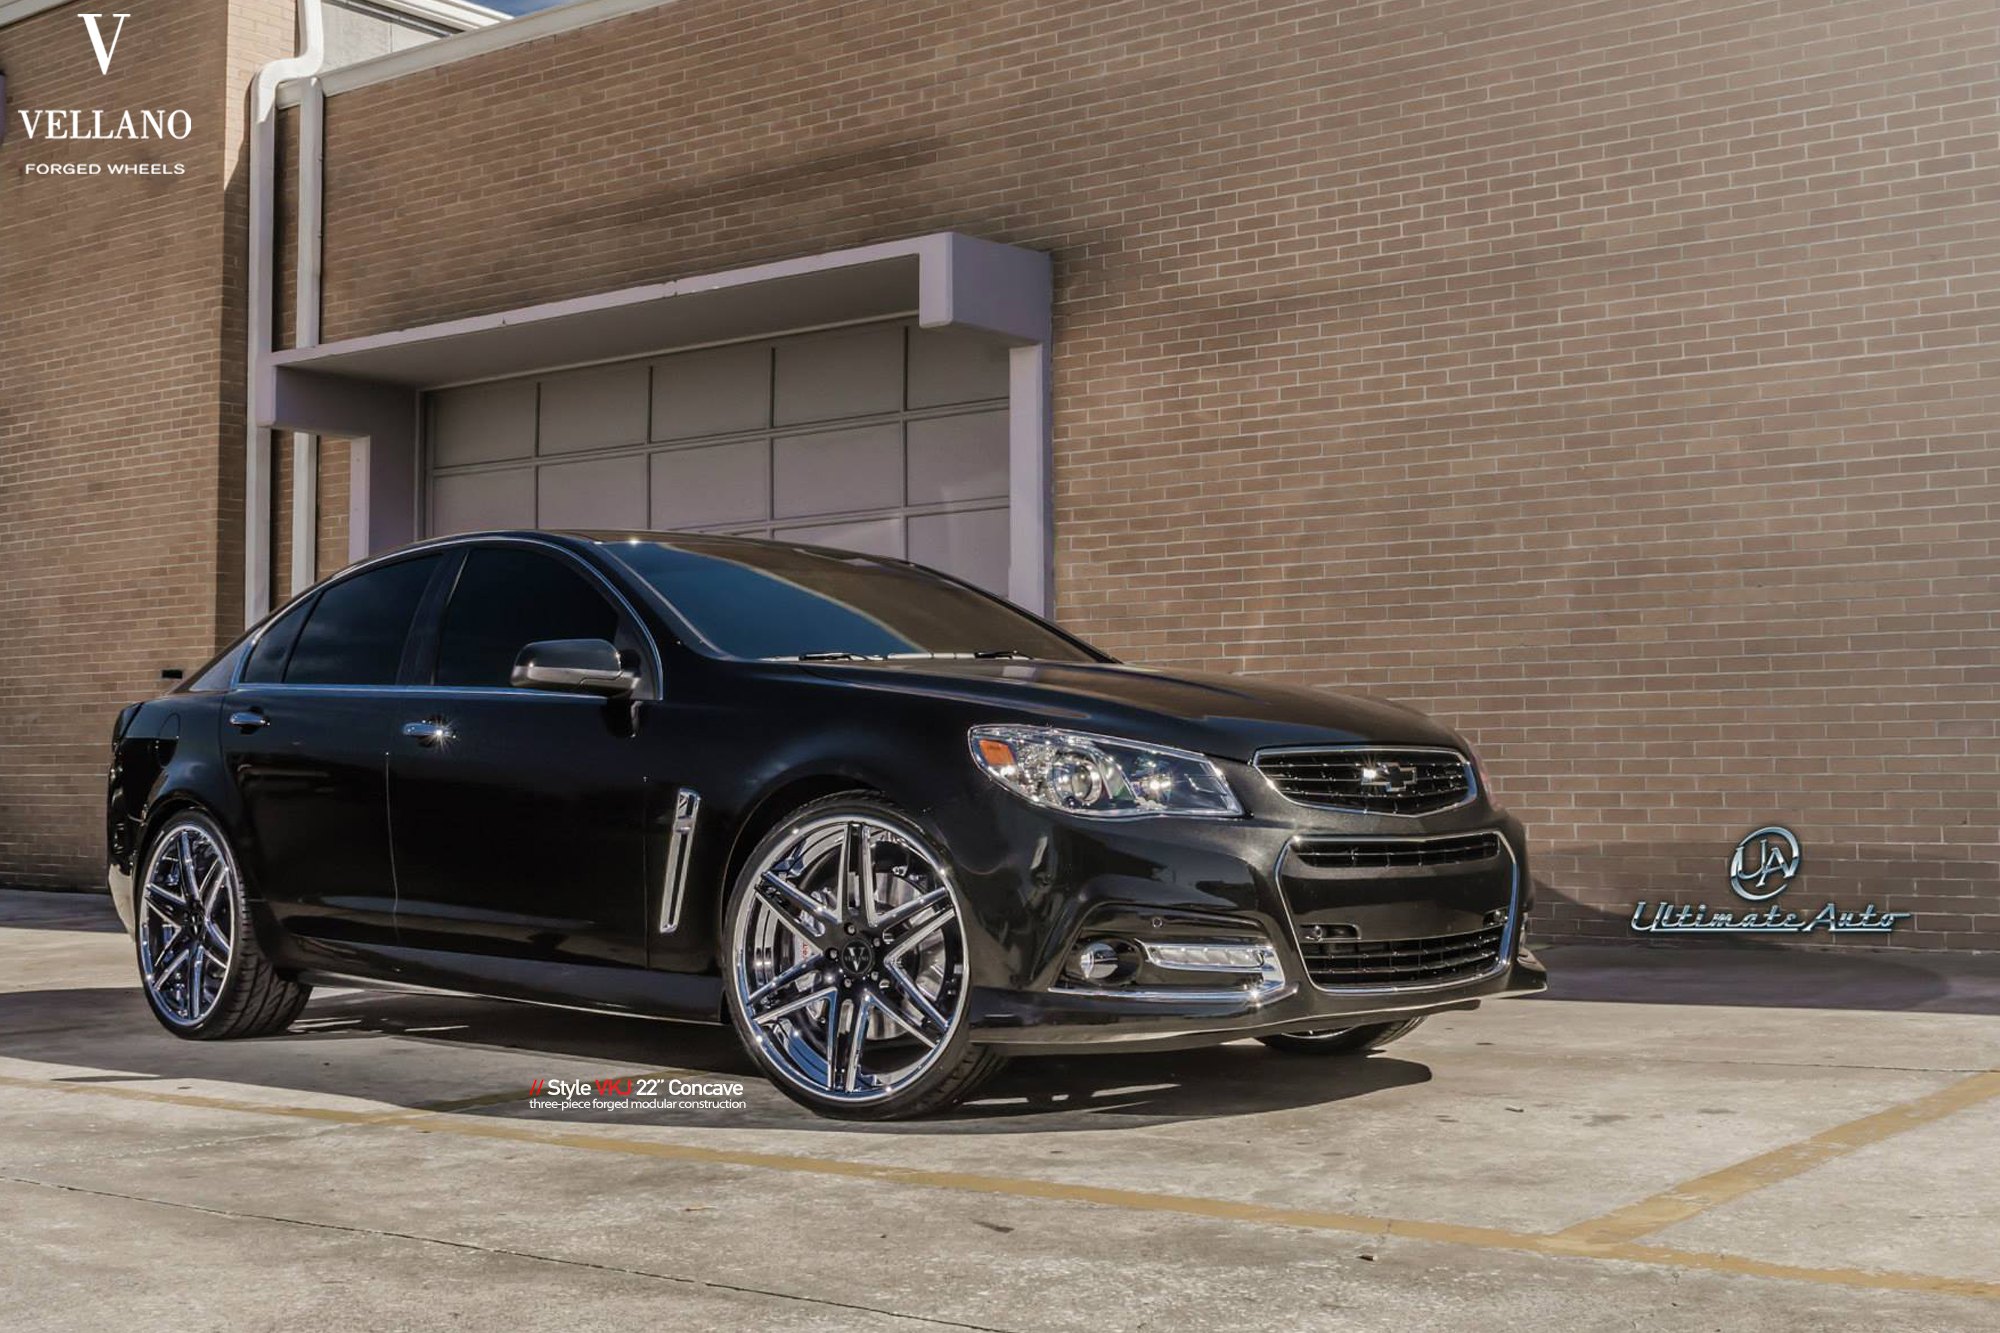 Front Bumper with Fog Lights on Black Chevy SS - Photo by Vellano